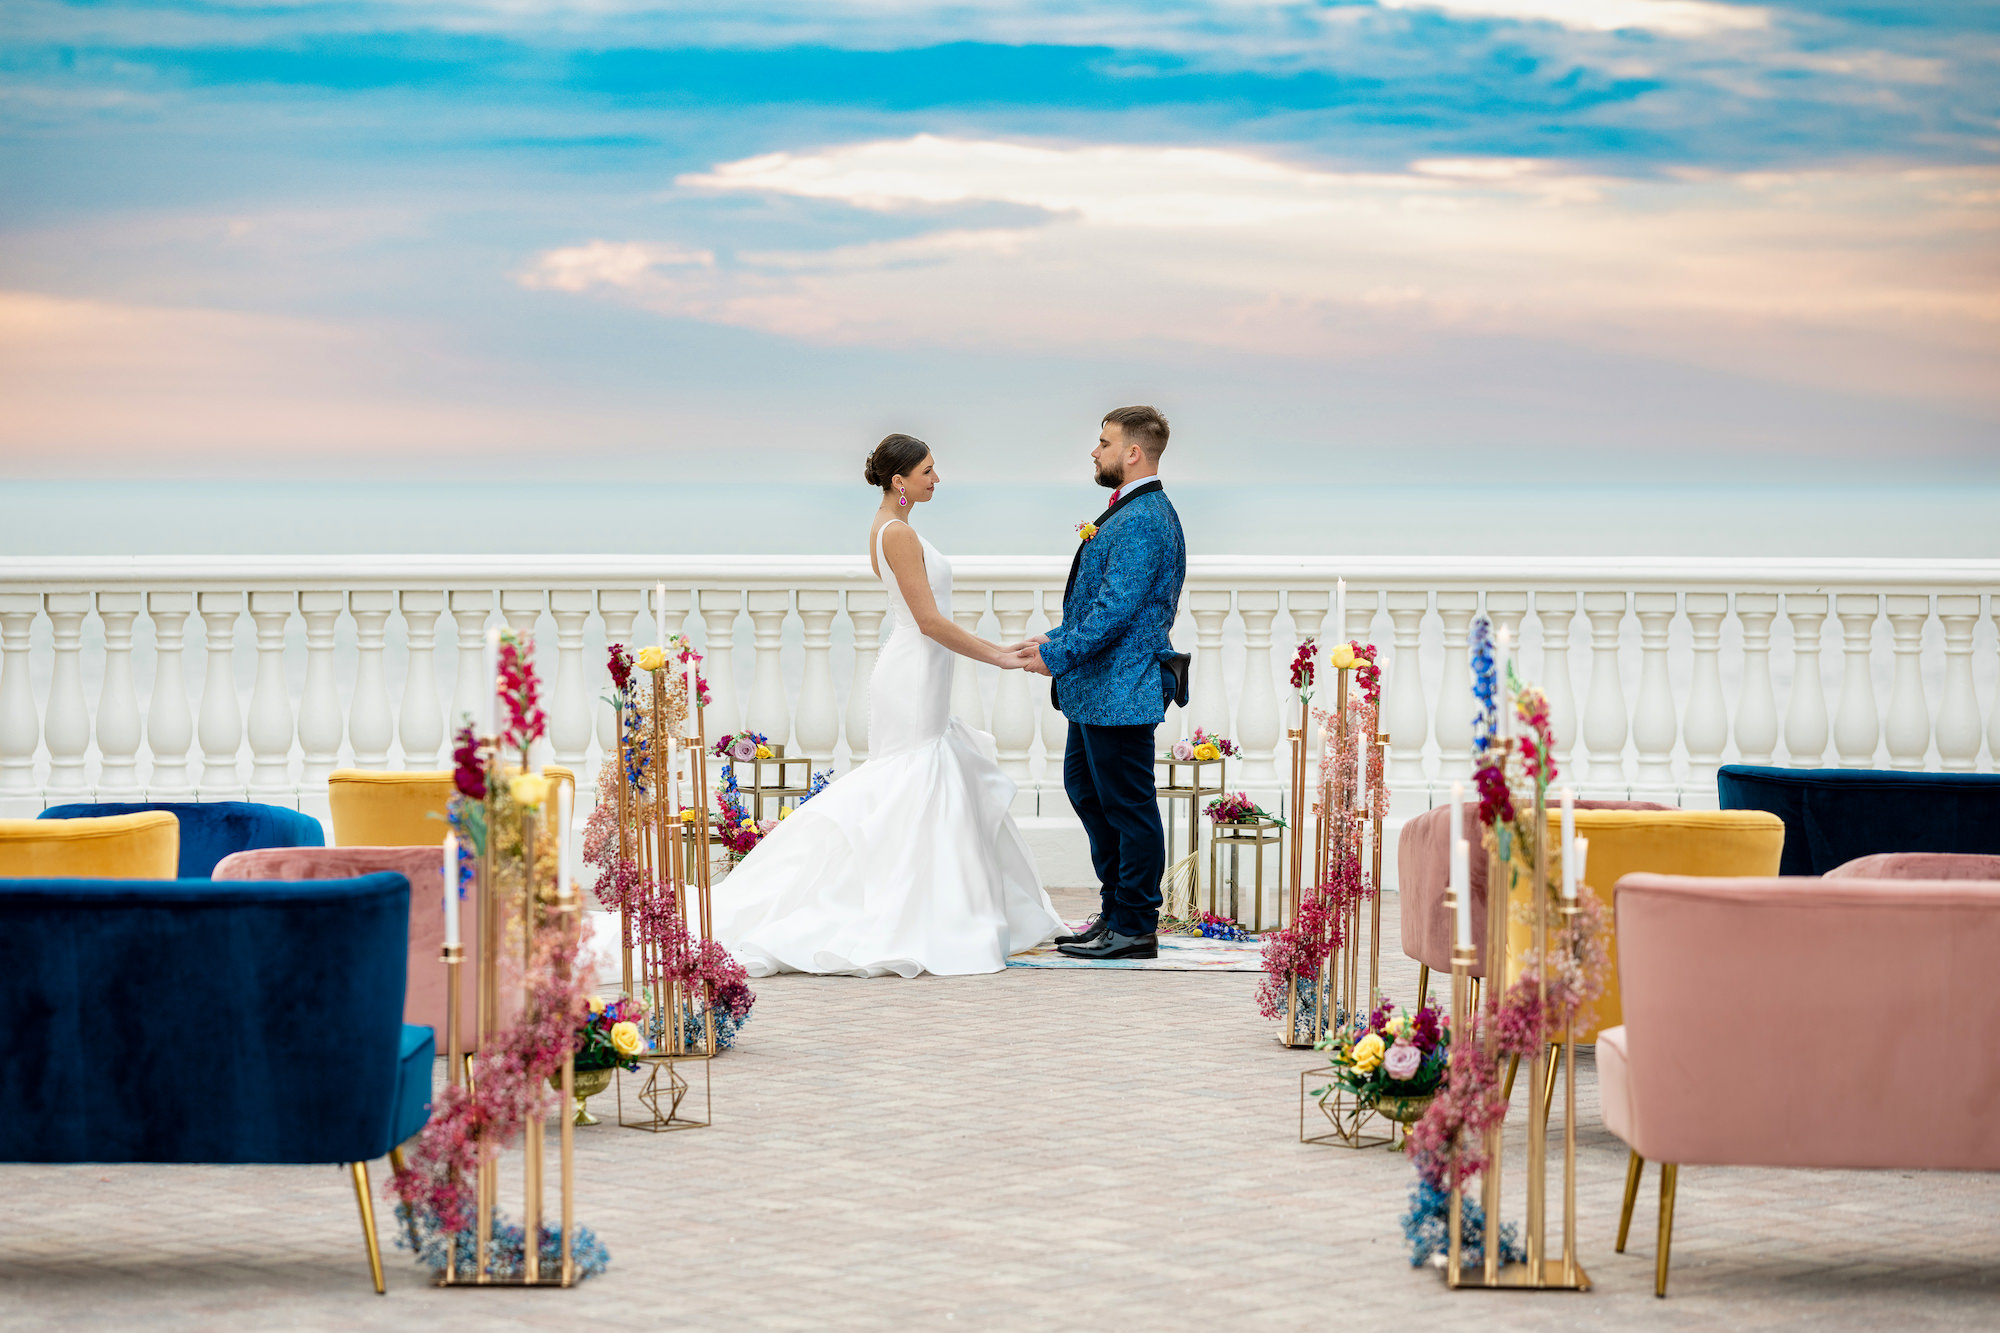 Vibrant Colorful Upholstered Lounge Furniture Wedding Ceremony Seating Ideas | Rooftop Waterfront Wedding Ceremony | Rental Gabro Event Services | Tampa Bay Venue Hyatt Clearwater Beach | Planner Eventfull Weddings